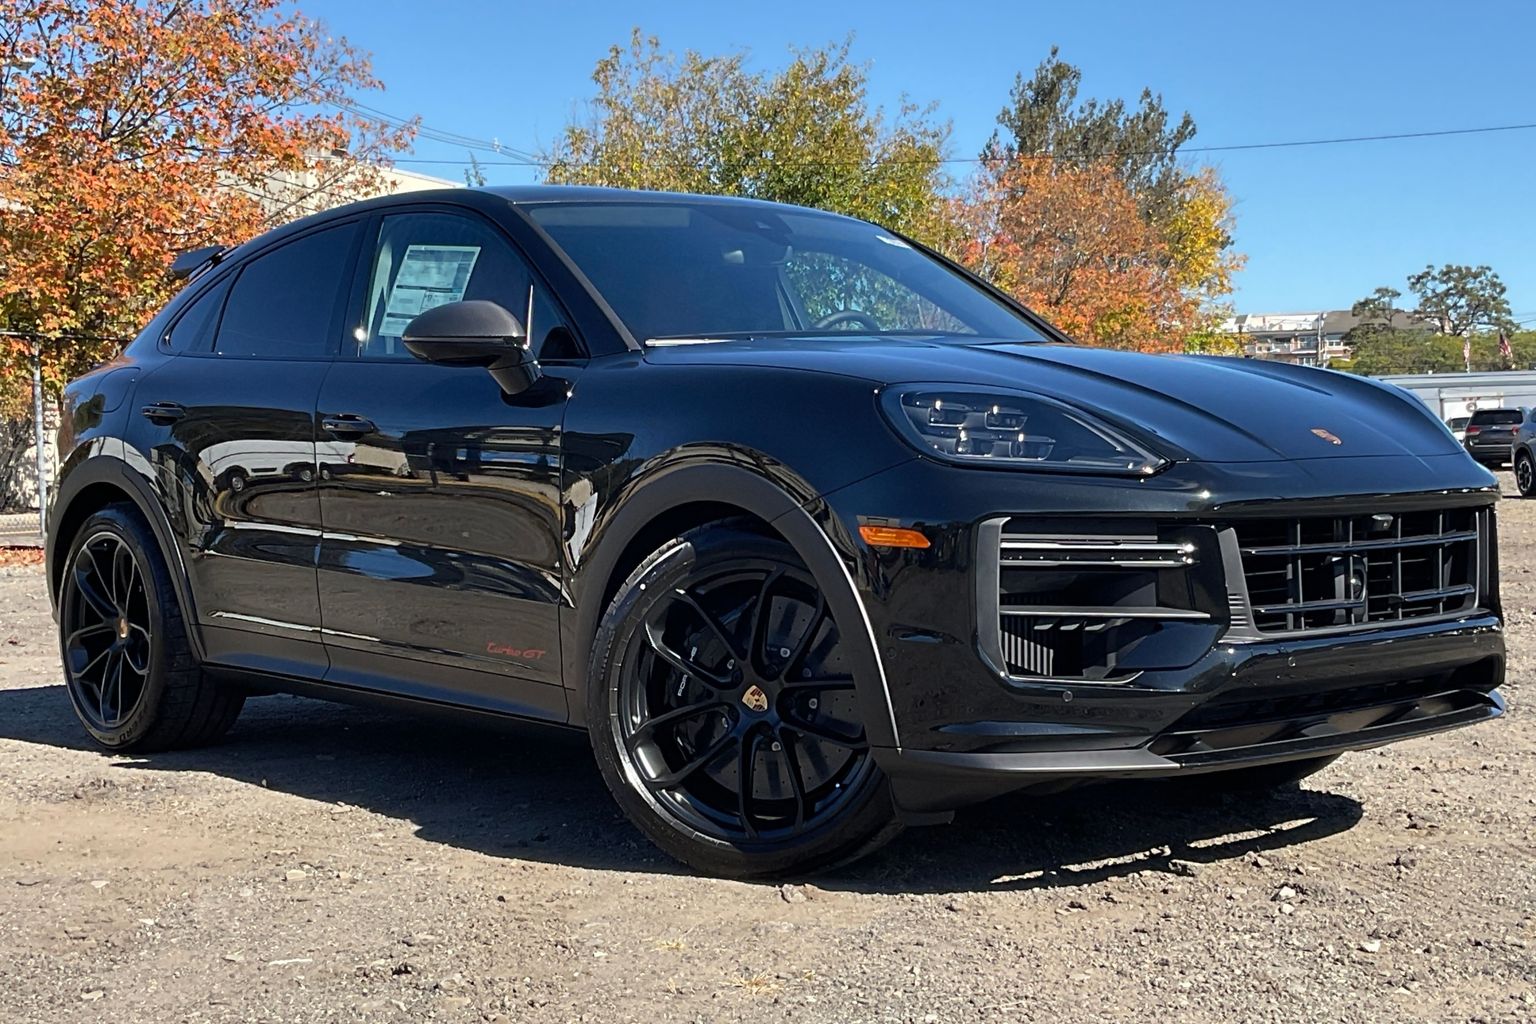 New Porsche Recall/Stop sell - any details?